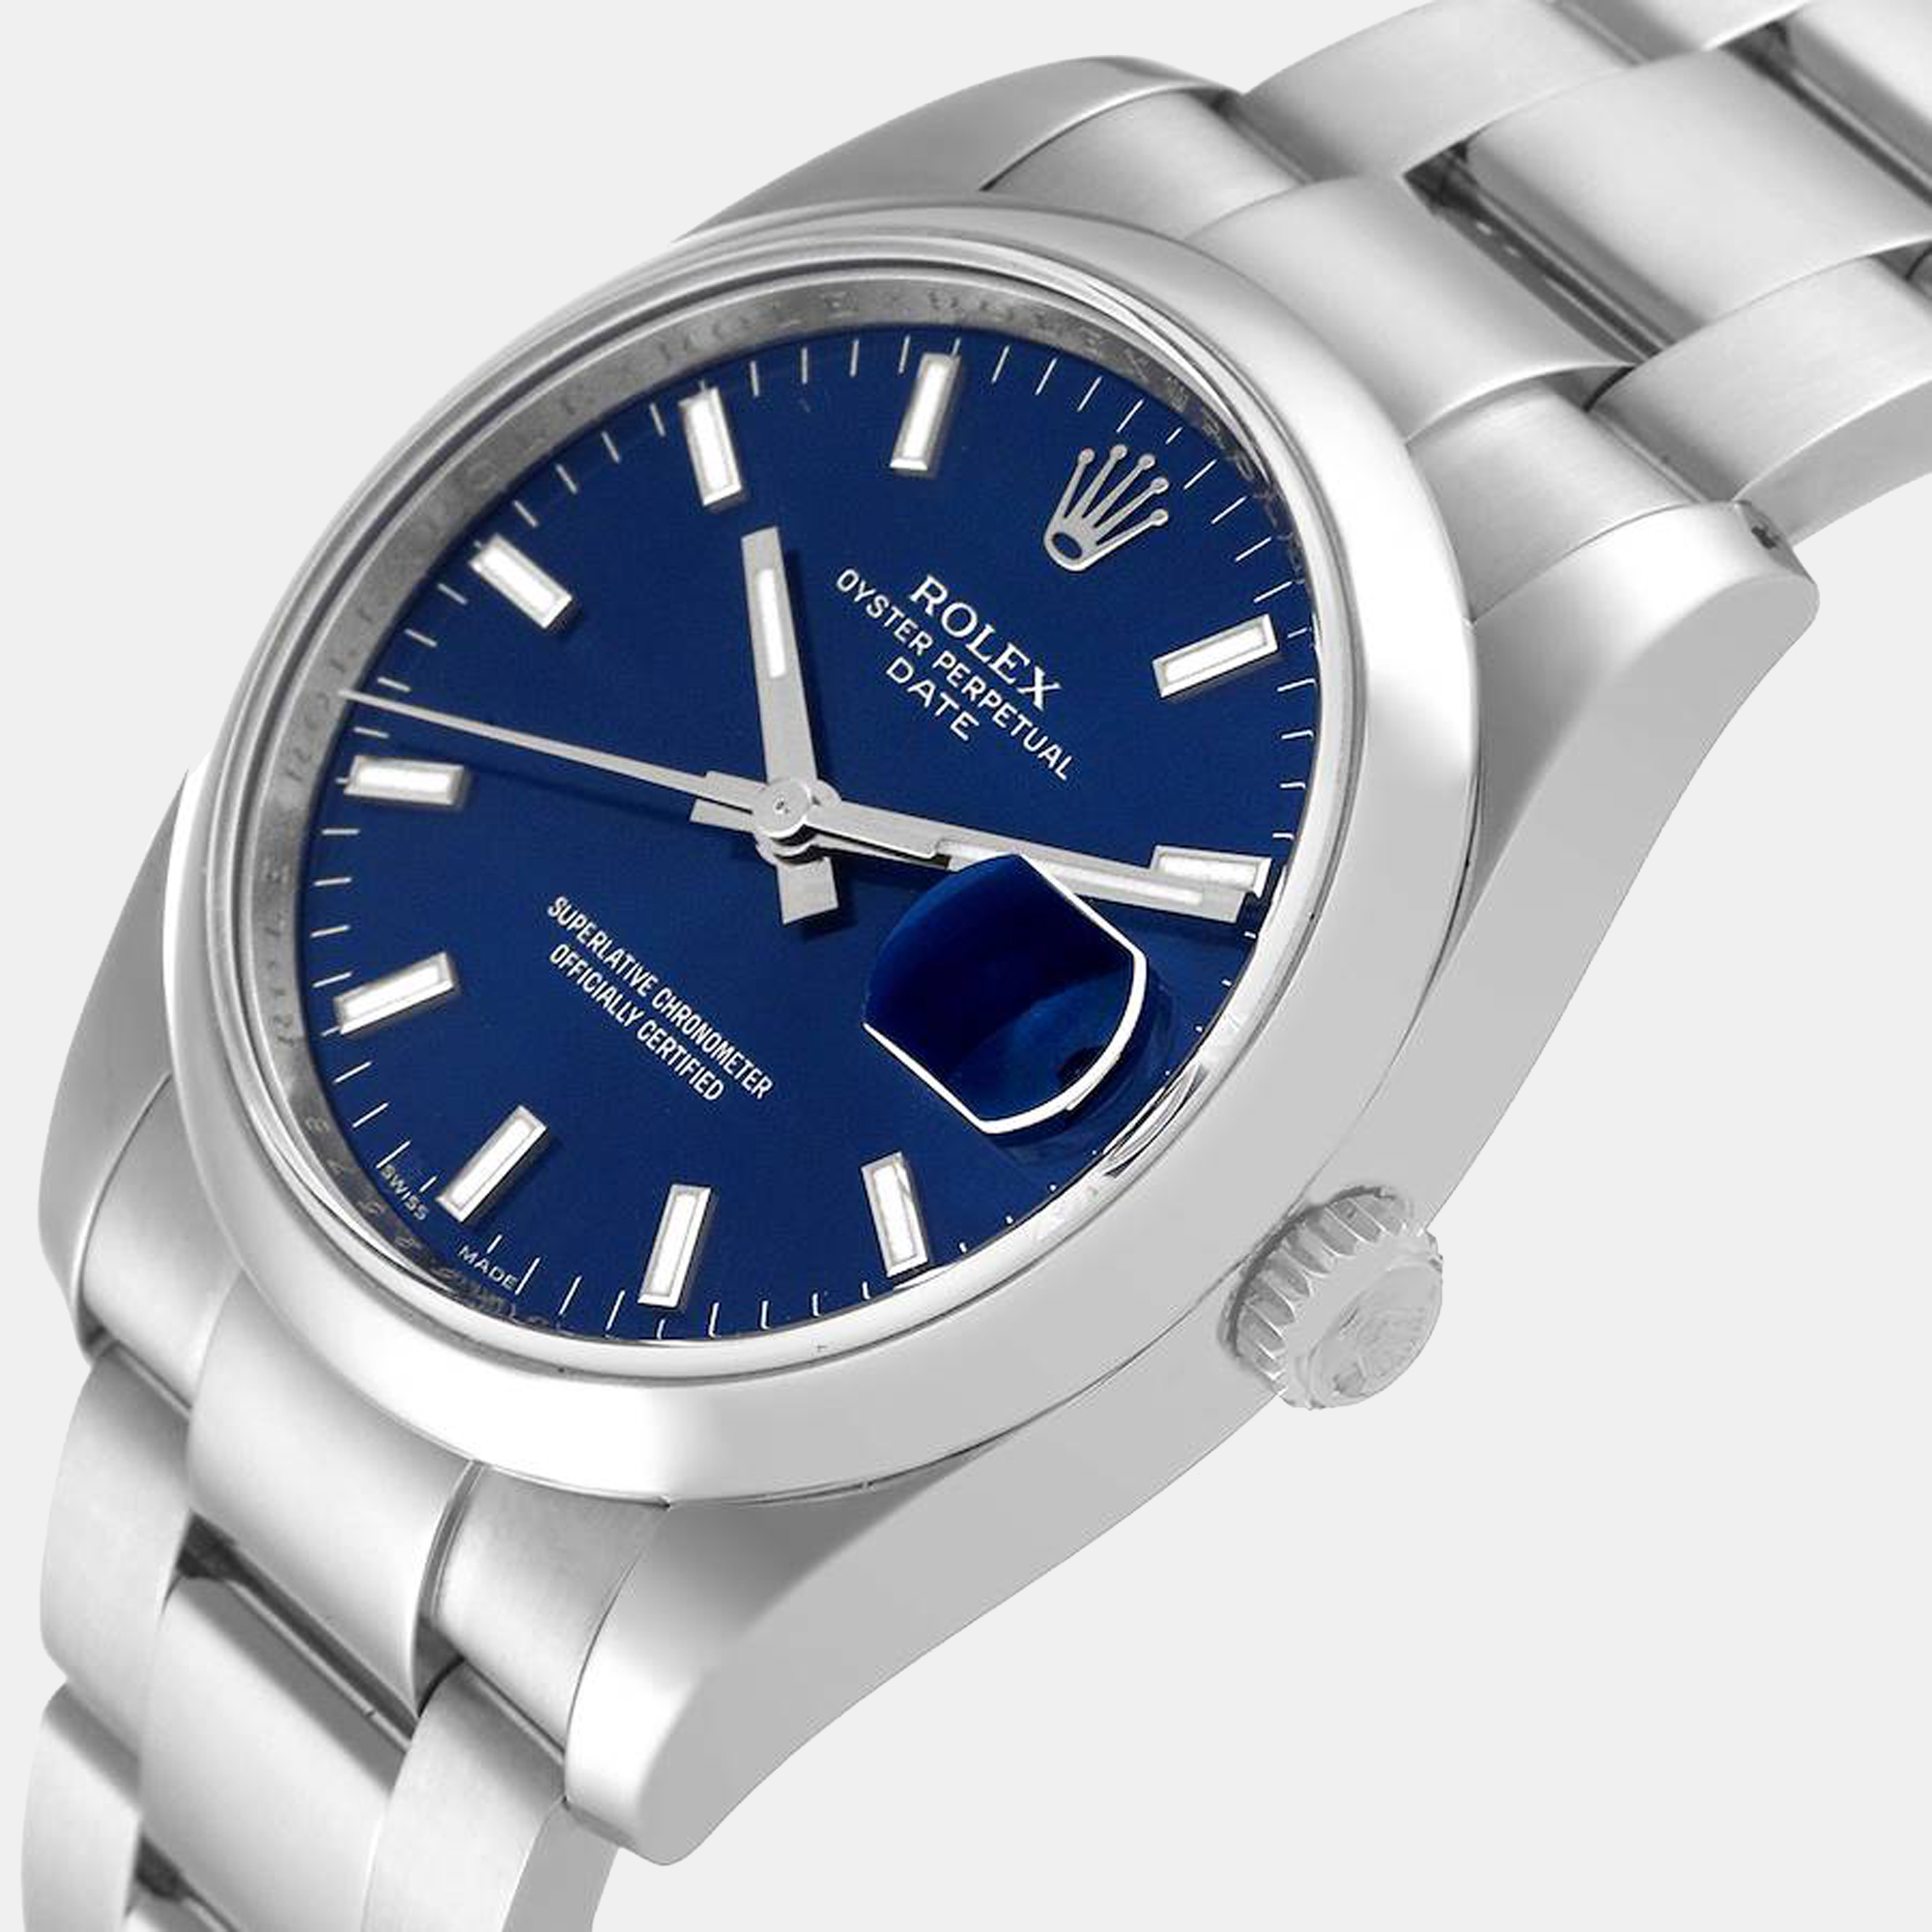 

Rolex Blue Stainless Steel Oyster Perpetual Date 115200 Men's Wristwatch 34 mm